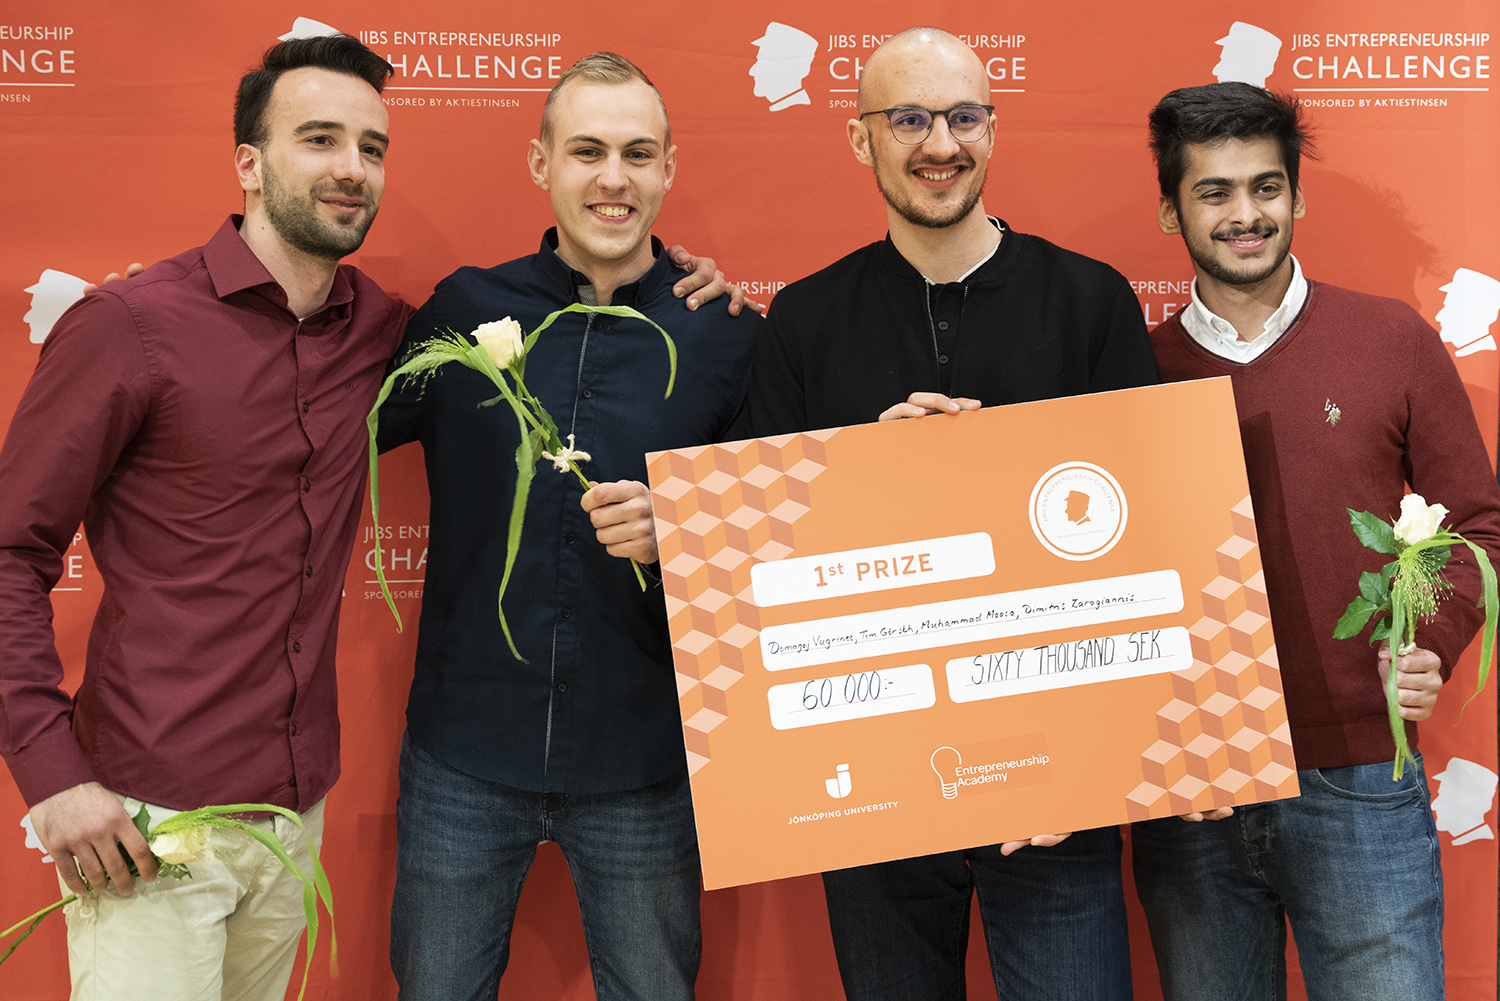 Students win with best idea for total sustainability